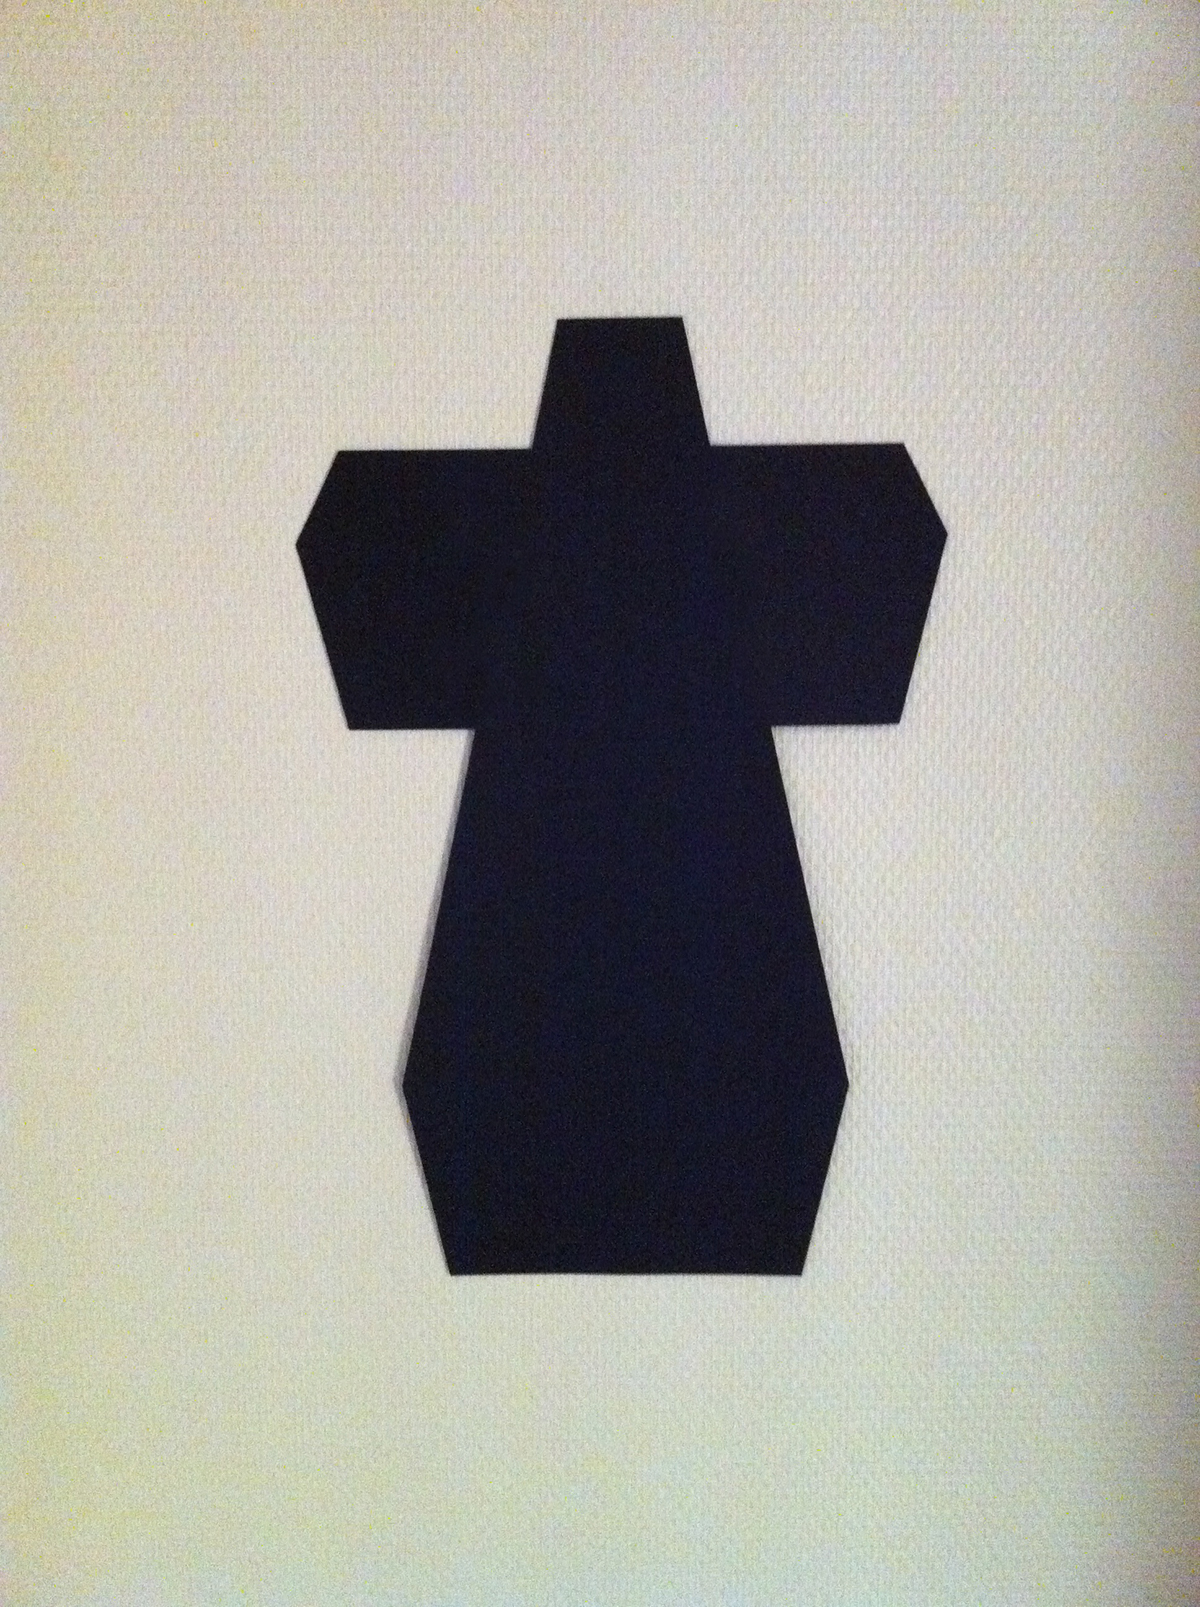 Justice cross poster